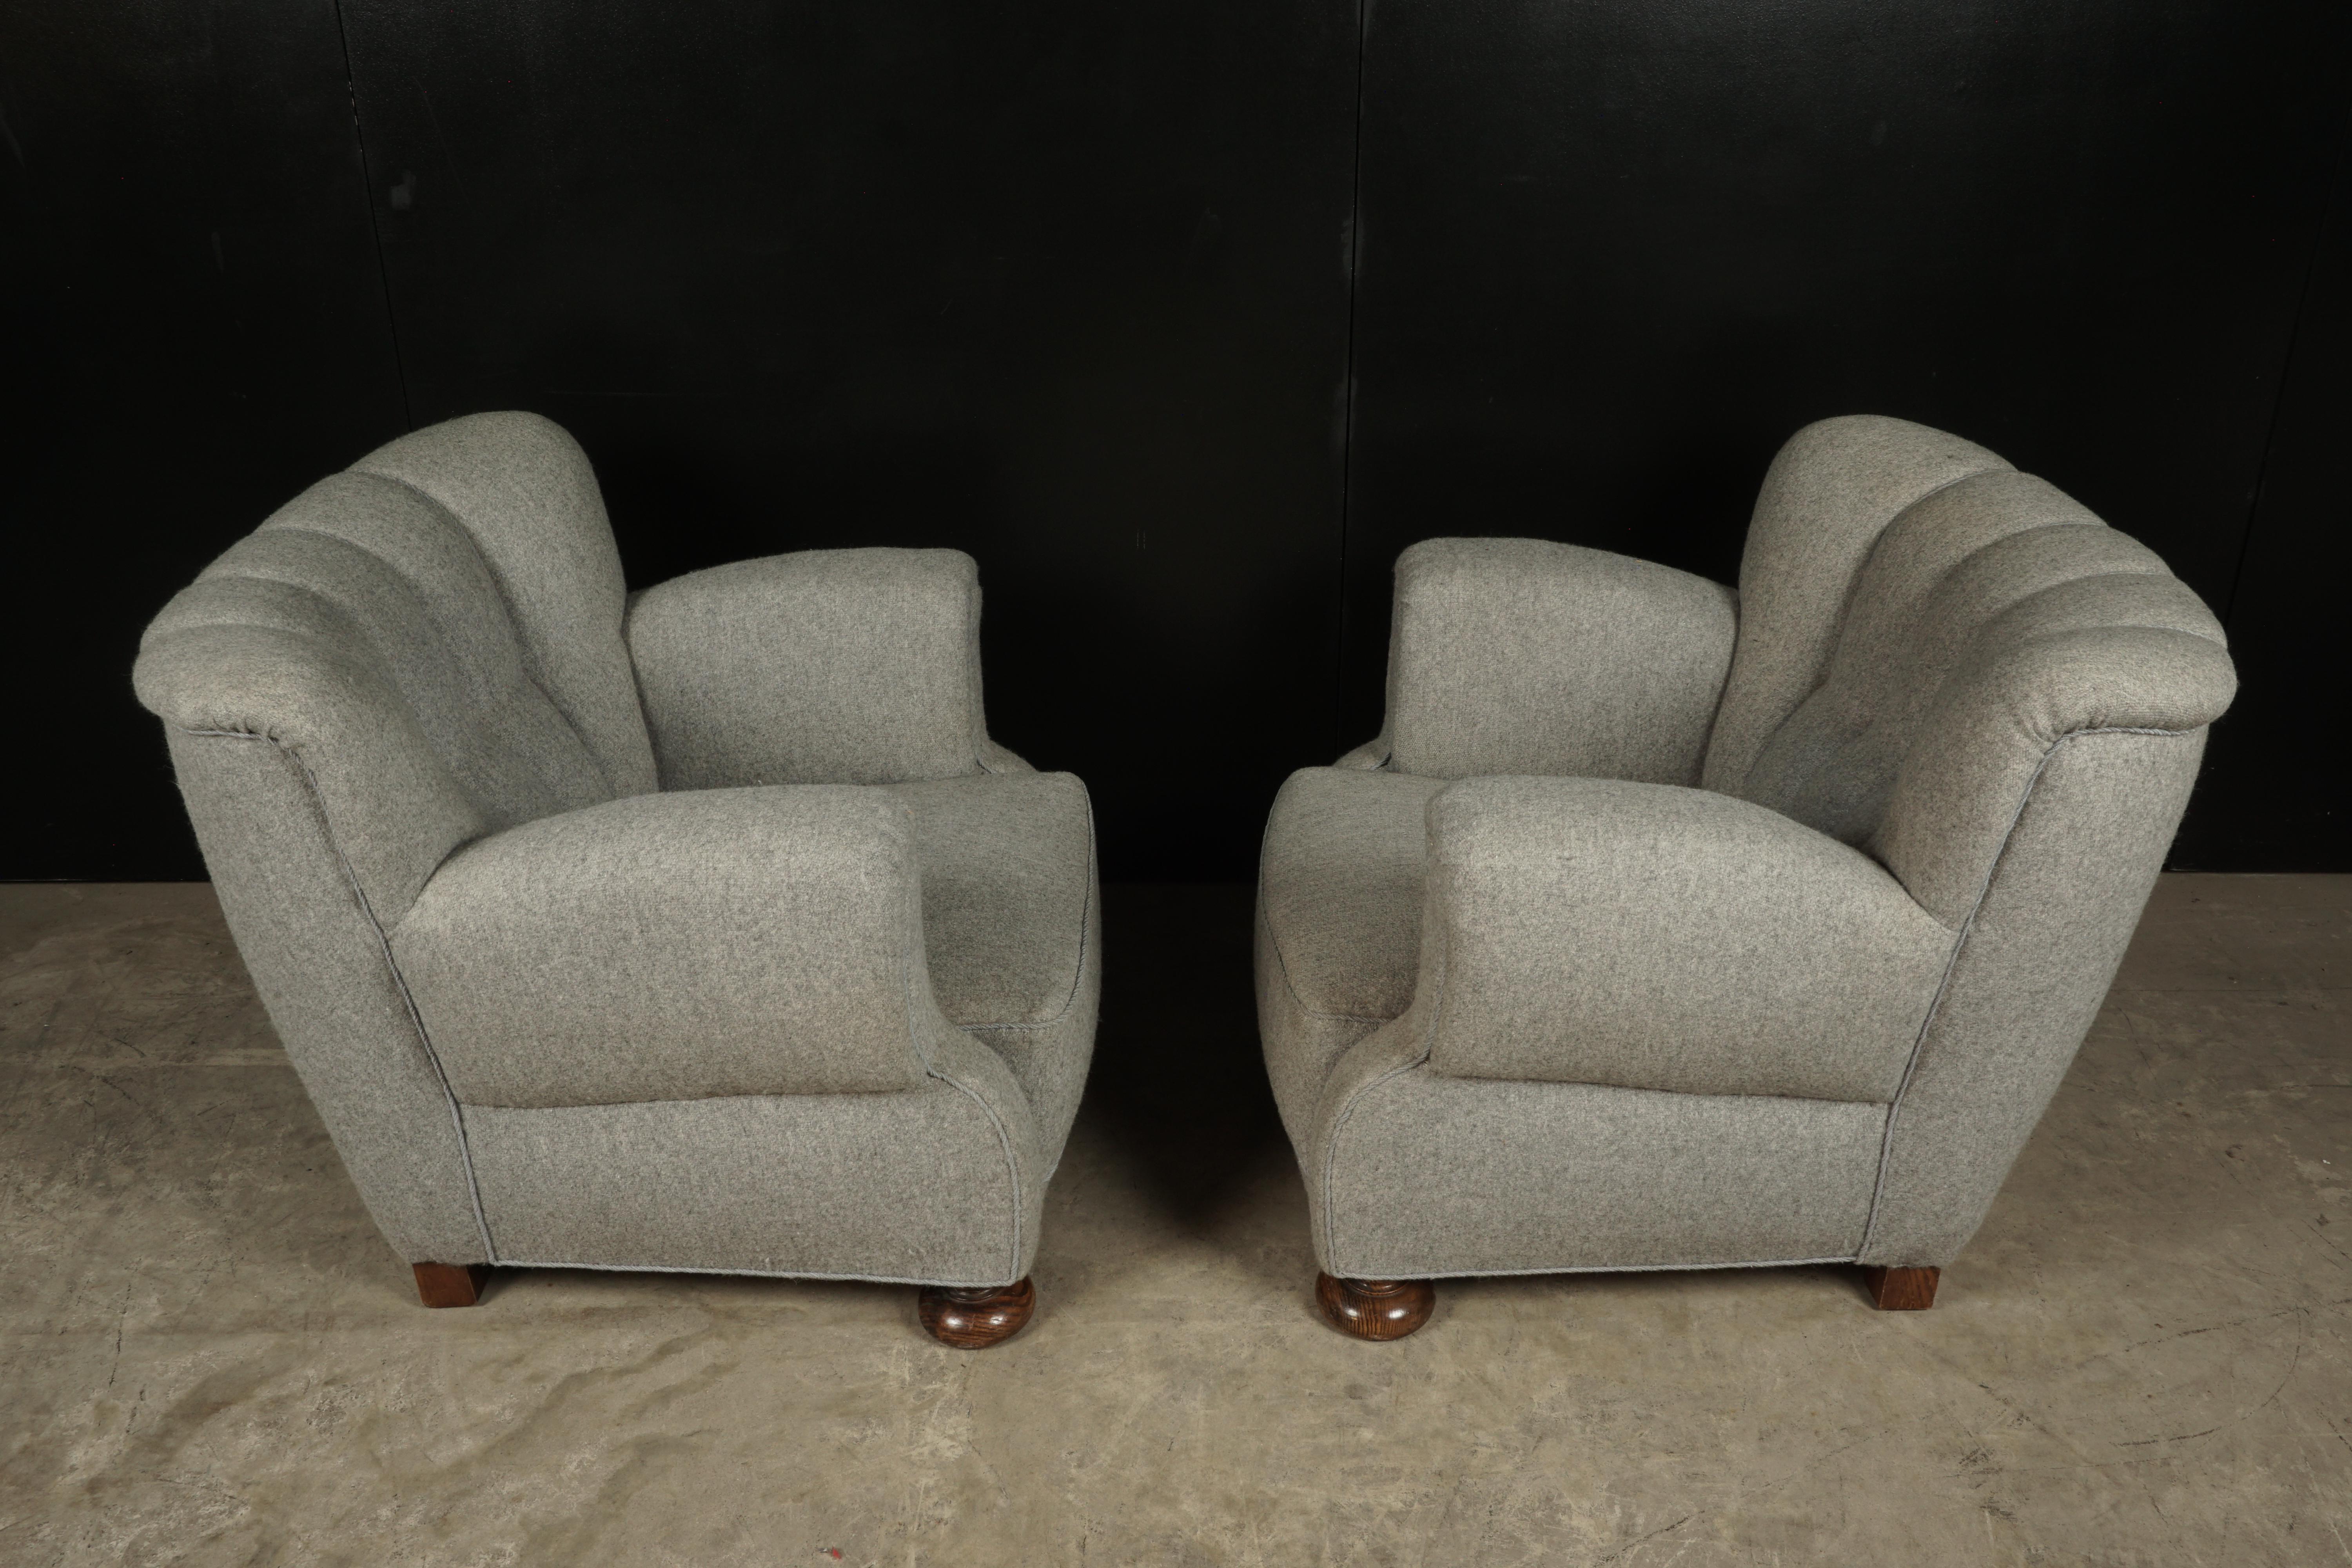 European Midcentury Pair of Art Deco Lounge Chairs from Denmark, circa 1950